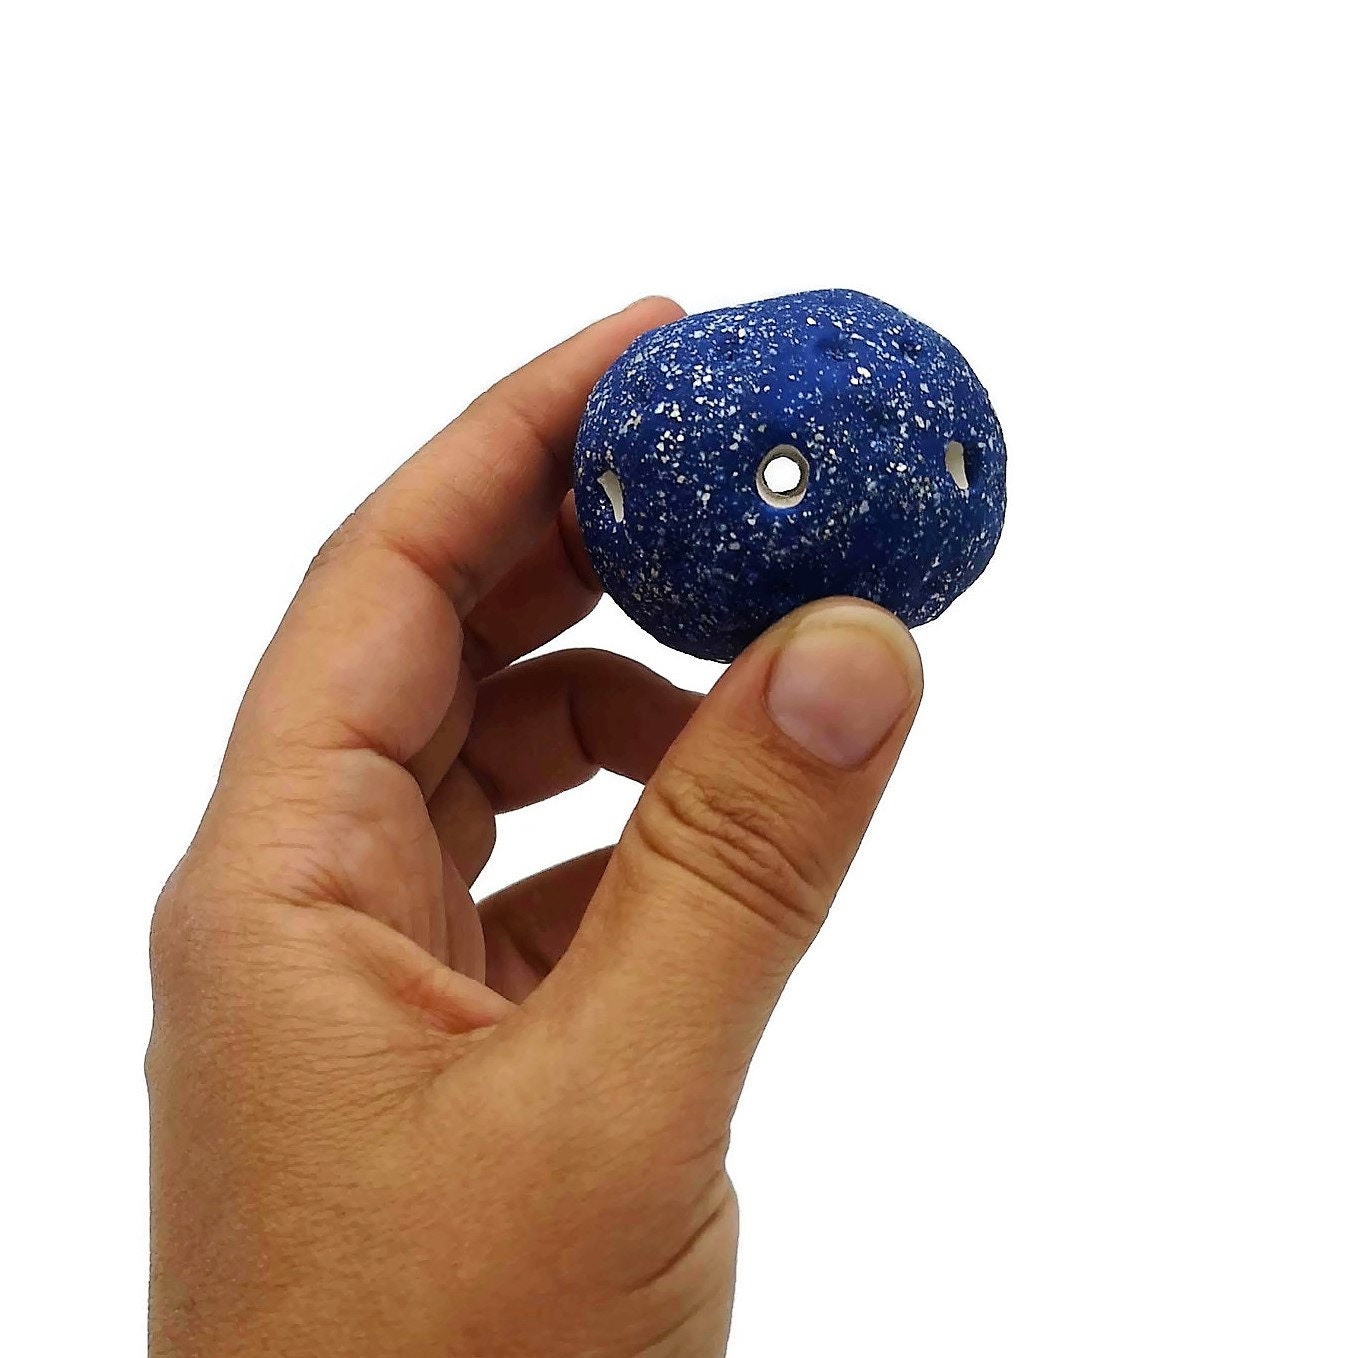 Extra Large Ceramic Beads, Giant Macrame Beads, Round Ball And Star Ornaments, Large Hole Beads Handmade, Sparkly Blue Focal Point Beads - Ceramica Ana Rafael